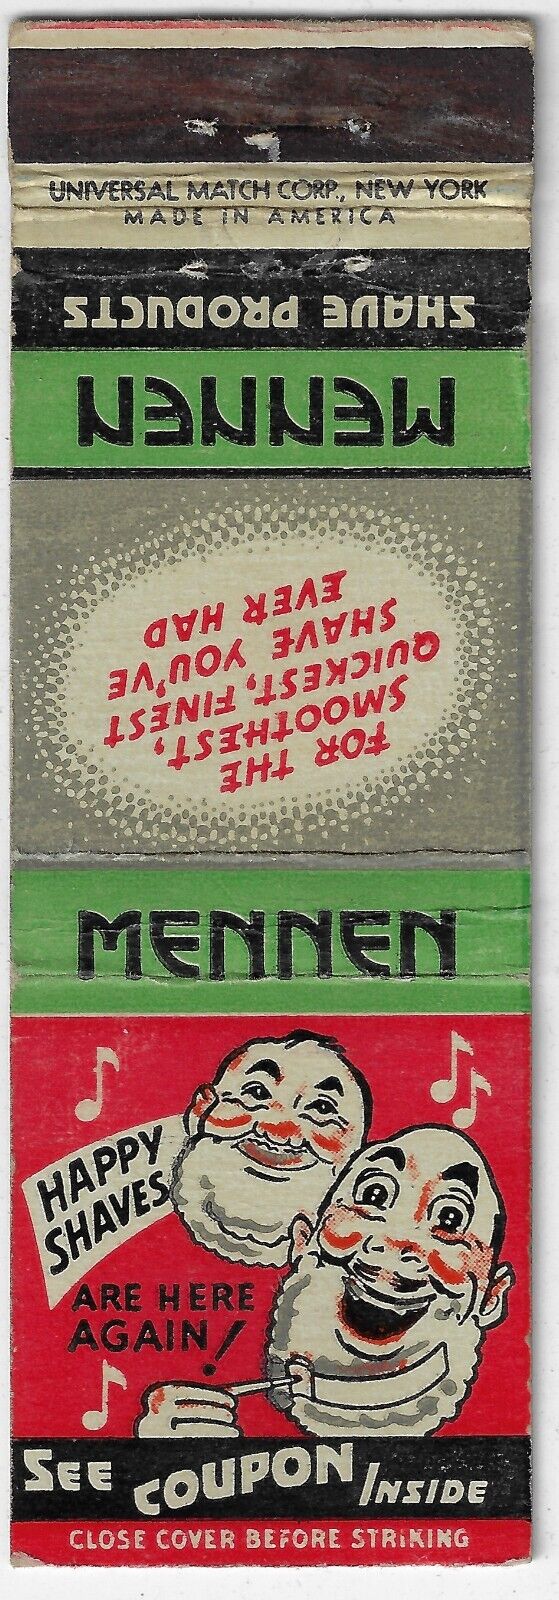 Mennen Shave Products Coupon Inside FS Empty Matchbook Cover